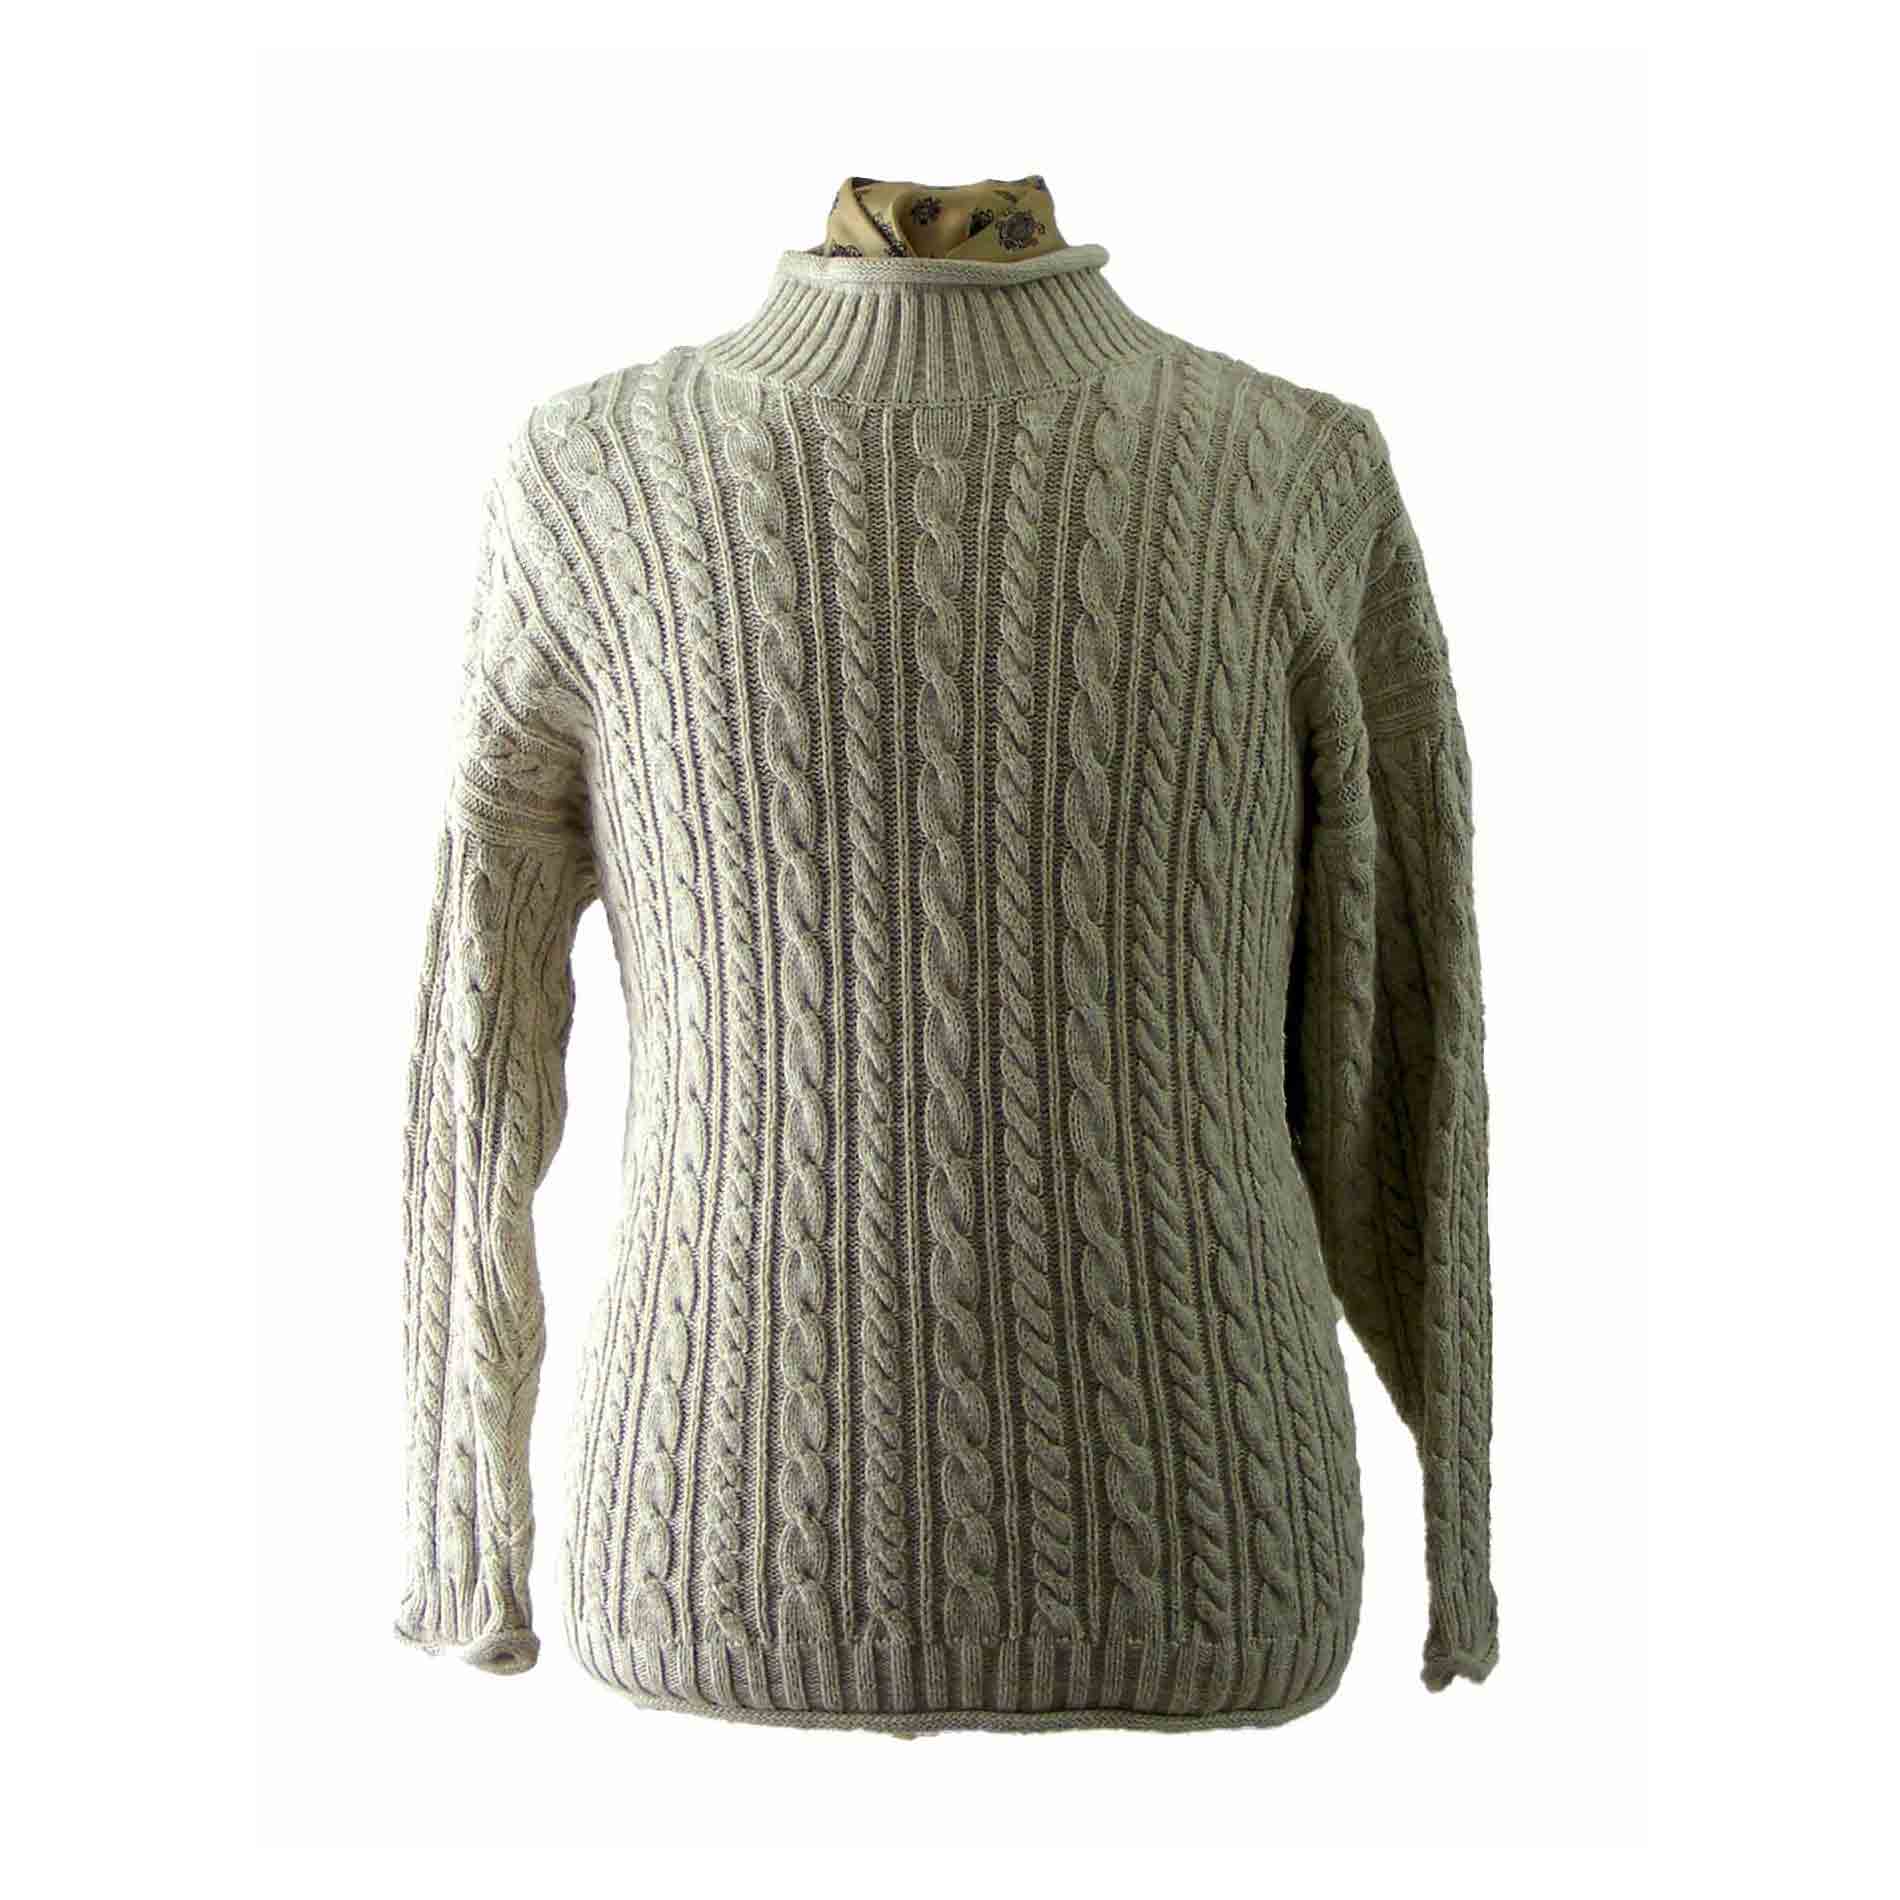 Cream Cable Knit Sweater - Blue 17 Vintage Clothing